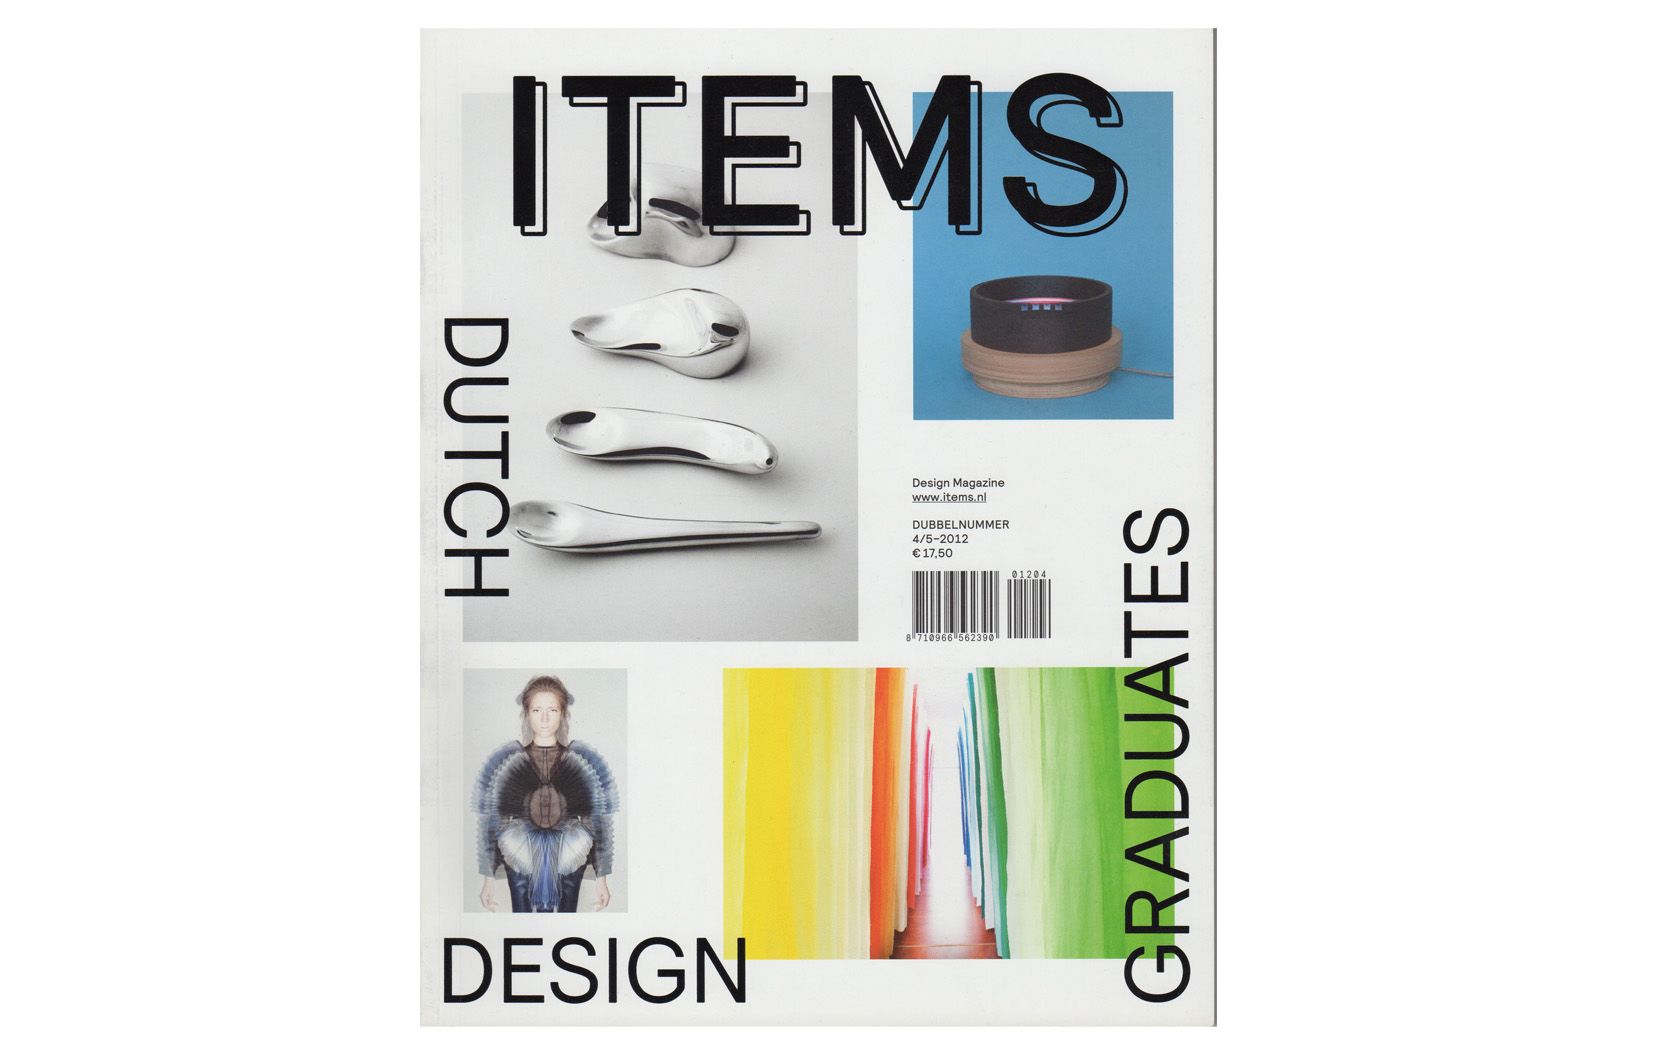  Items magazine used to be one of the leading magazine for design in The Netherlands. Their yearly selection of graduates is a tastery for upcoming talent.&nbsp;The 2012 graduates selection - unfortunately the last selection Items has been able to pu